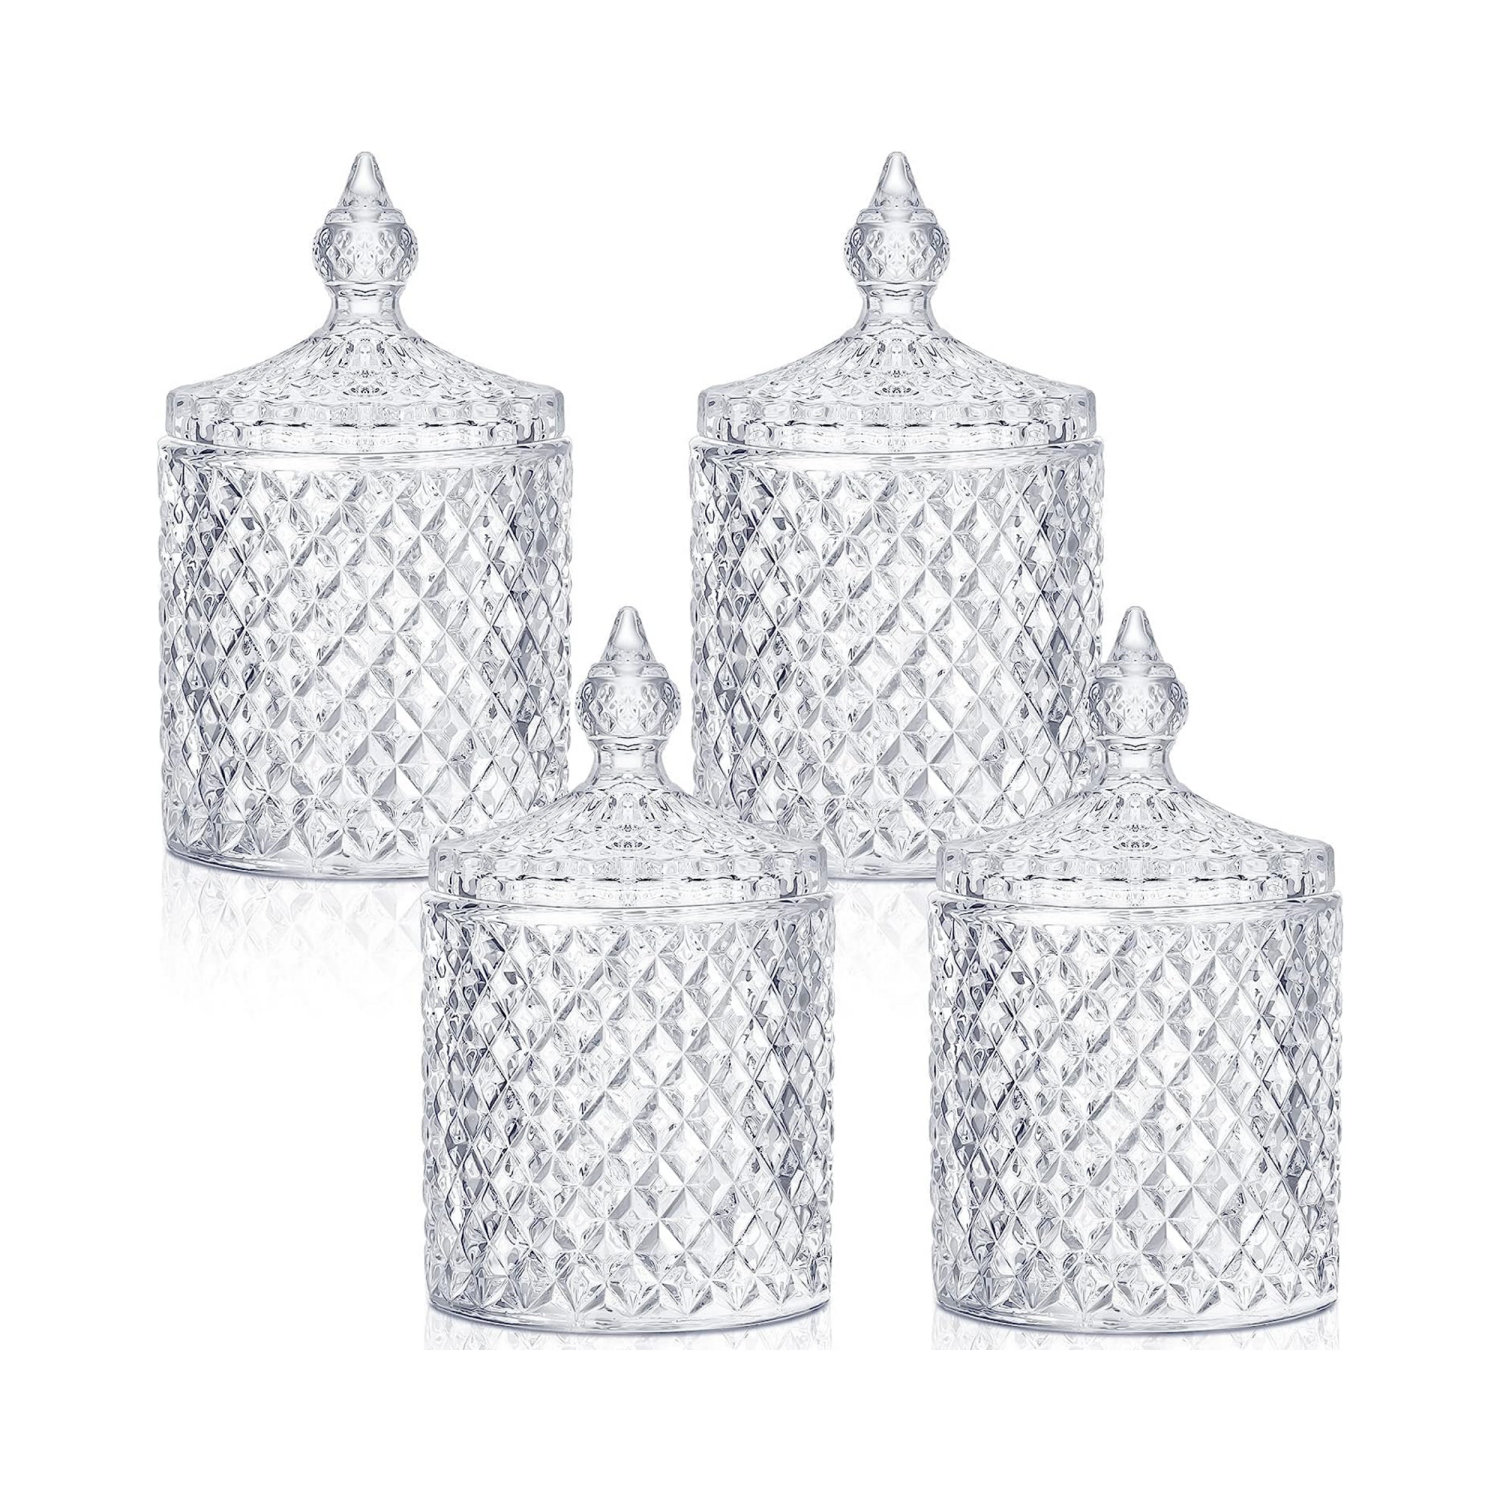 Crystalia Decorative Glass Candy Jar With Lid - Glass - 145 requests